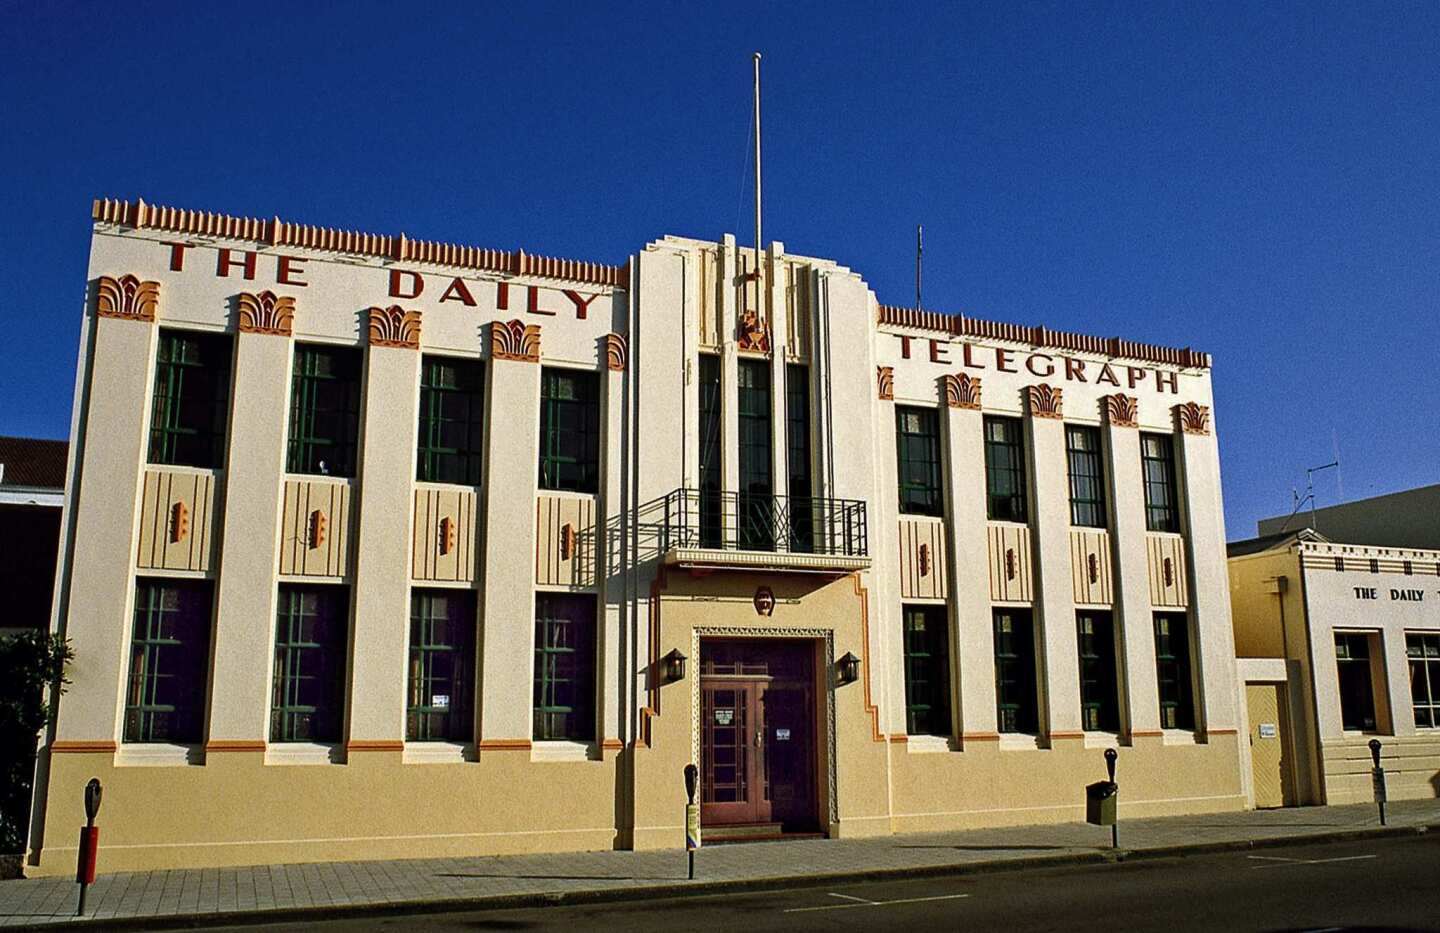 The Daily Telegraph Building was built in 1932 and designed by architect E.A. Williams. The building no longer houses a newspaper since mergers in the late '90s.